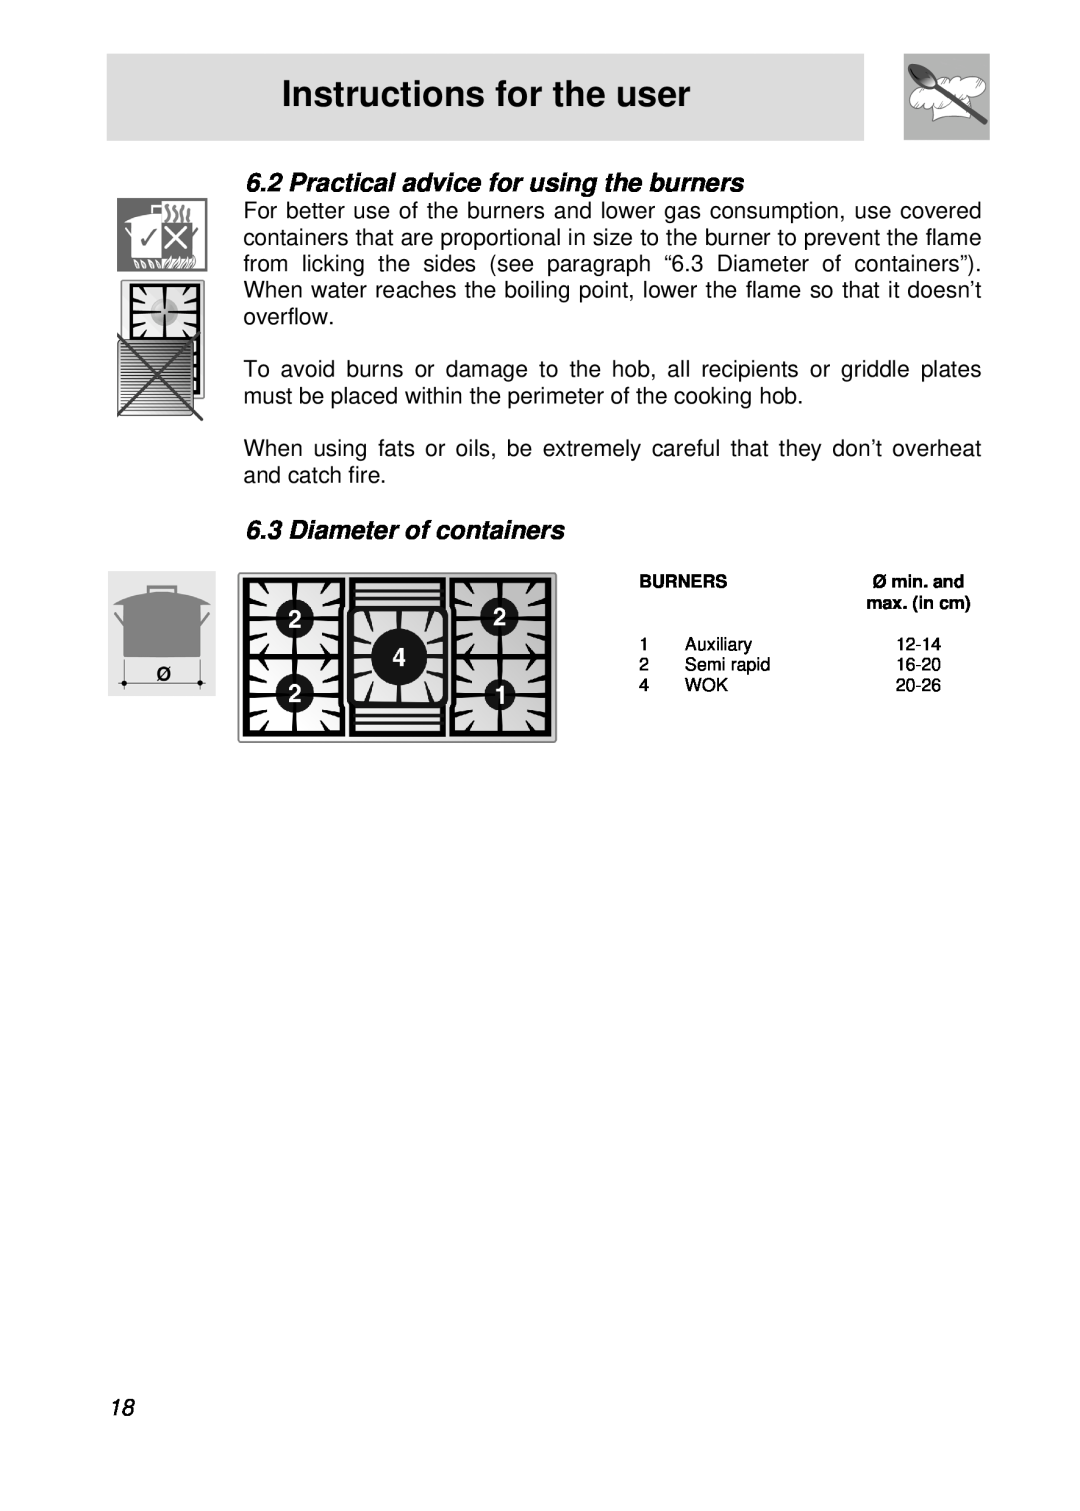 Smeg PGFA95F manual Practical advice for using the burners, Diameter of containers, Instructions for the user, Burners 